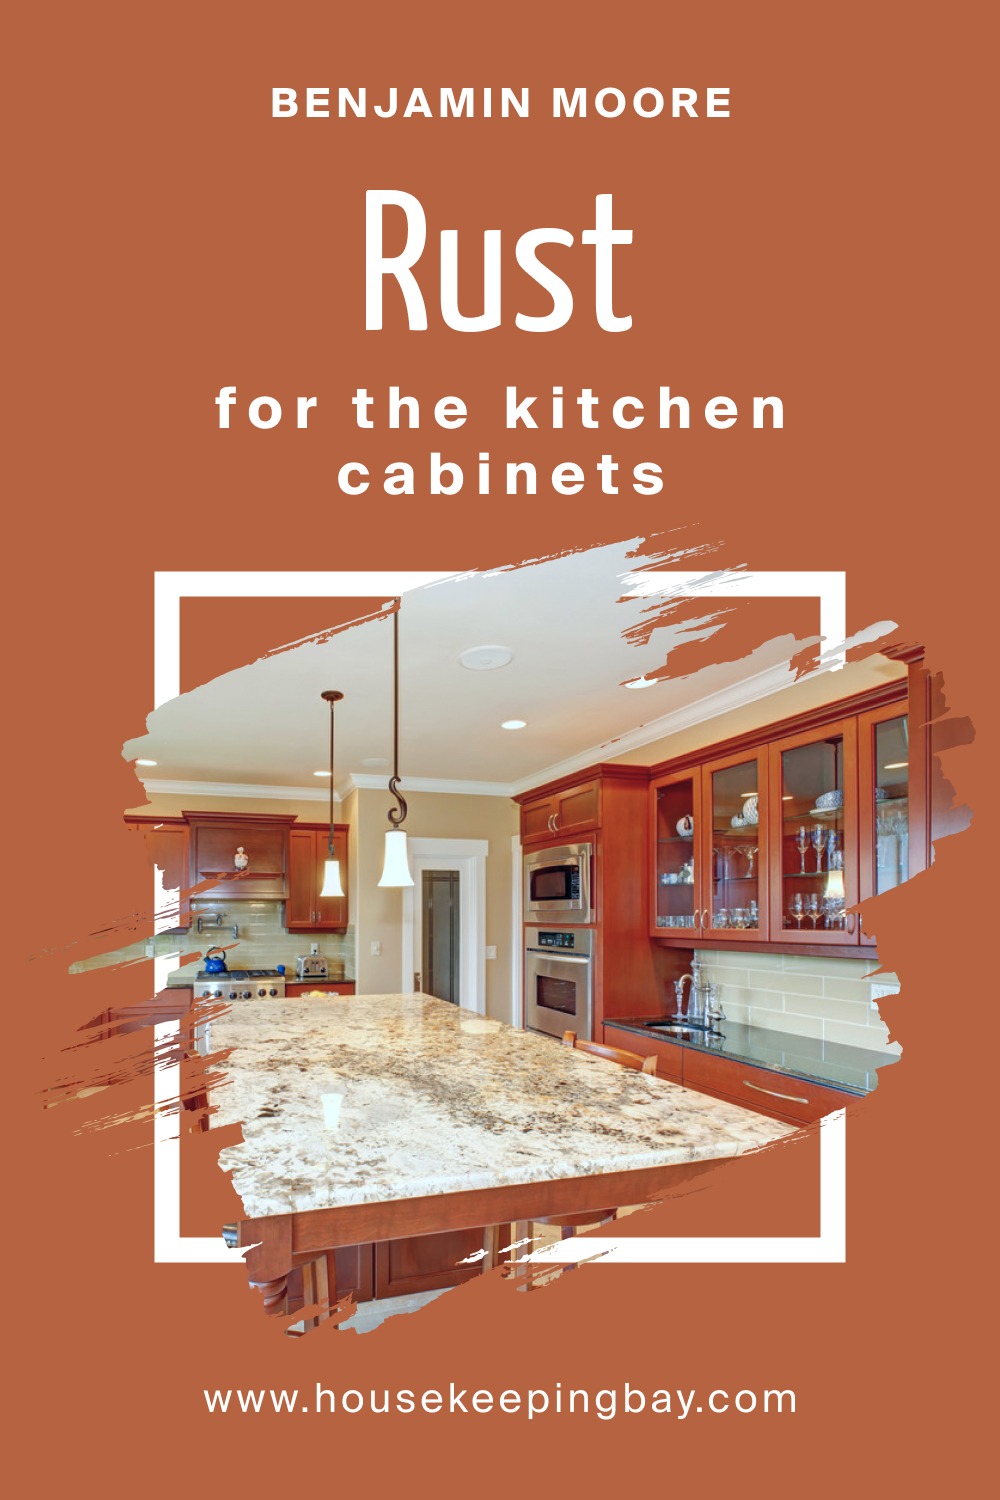 How to Use BM Rust 2175-30 on the Kitchen Cabinets?